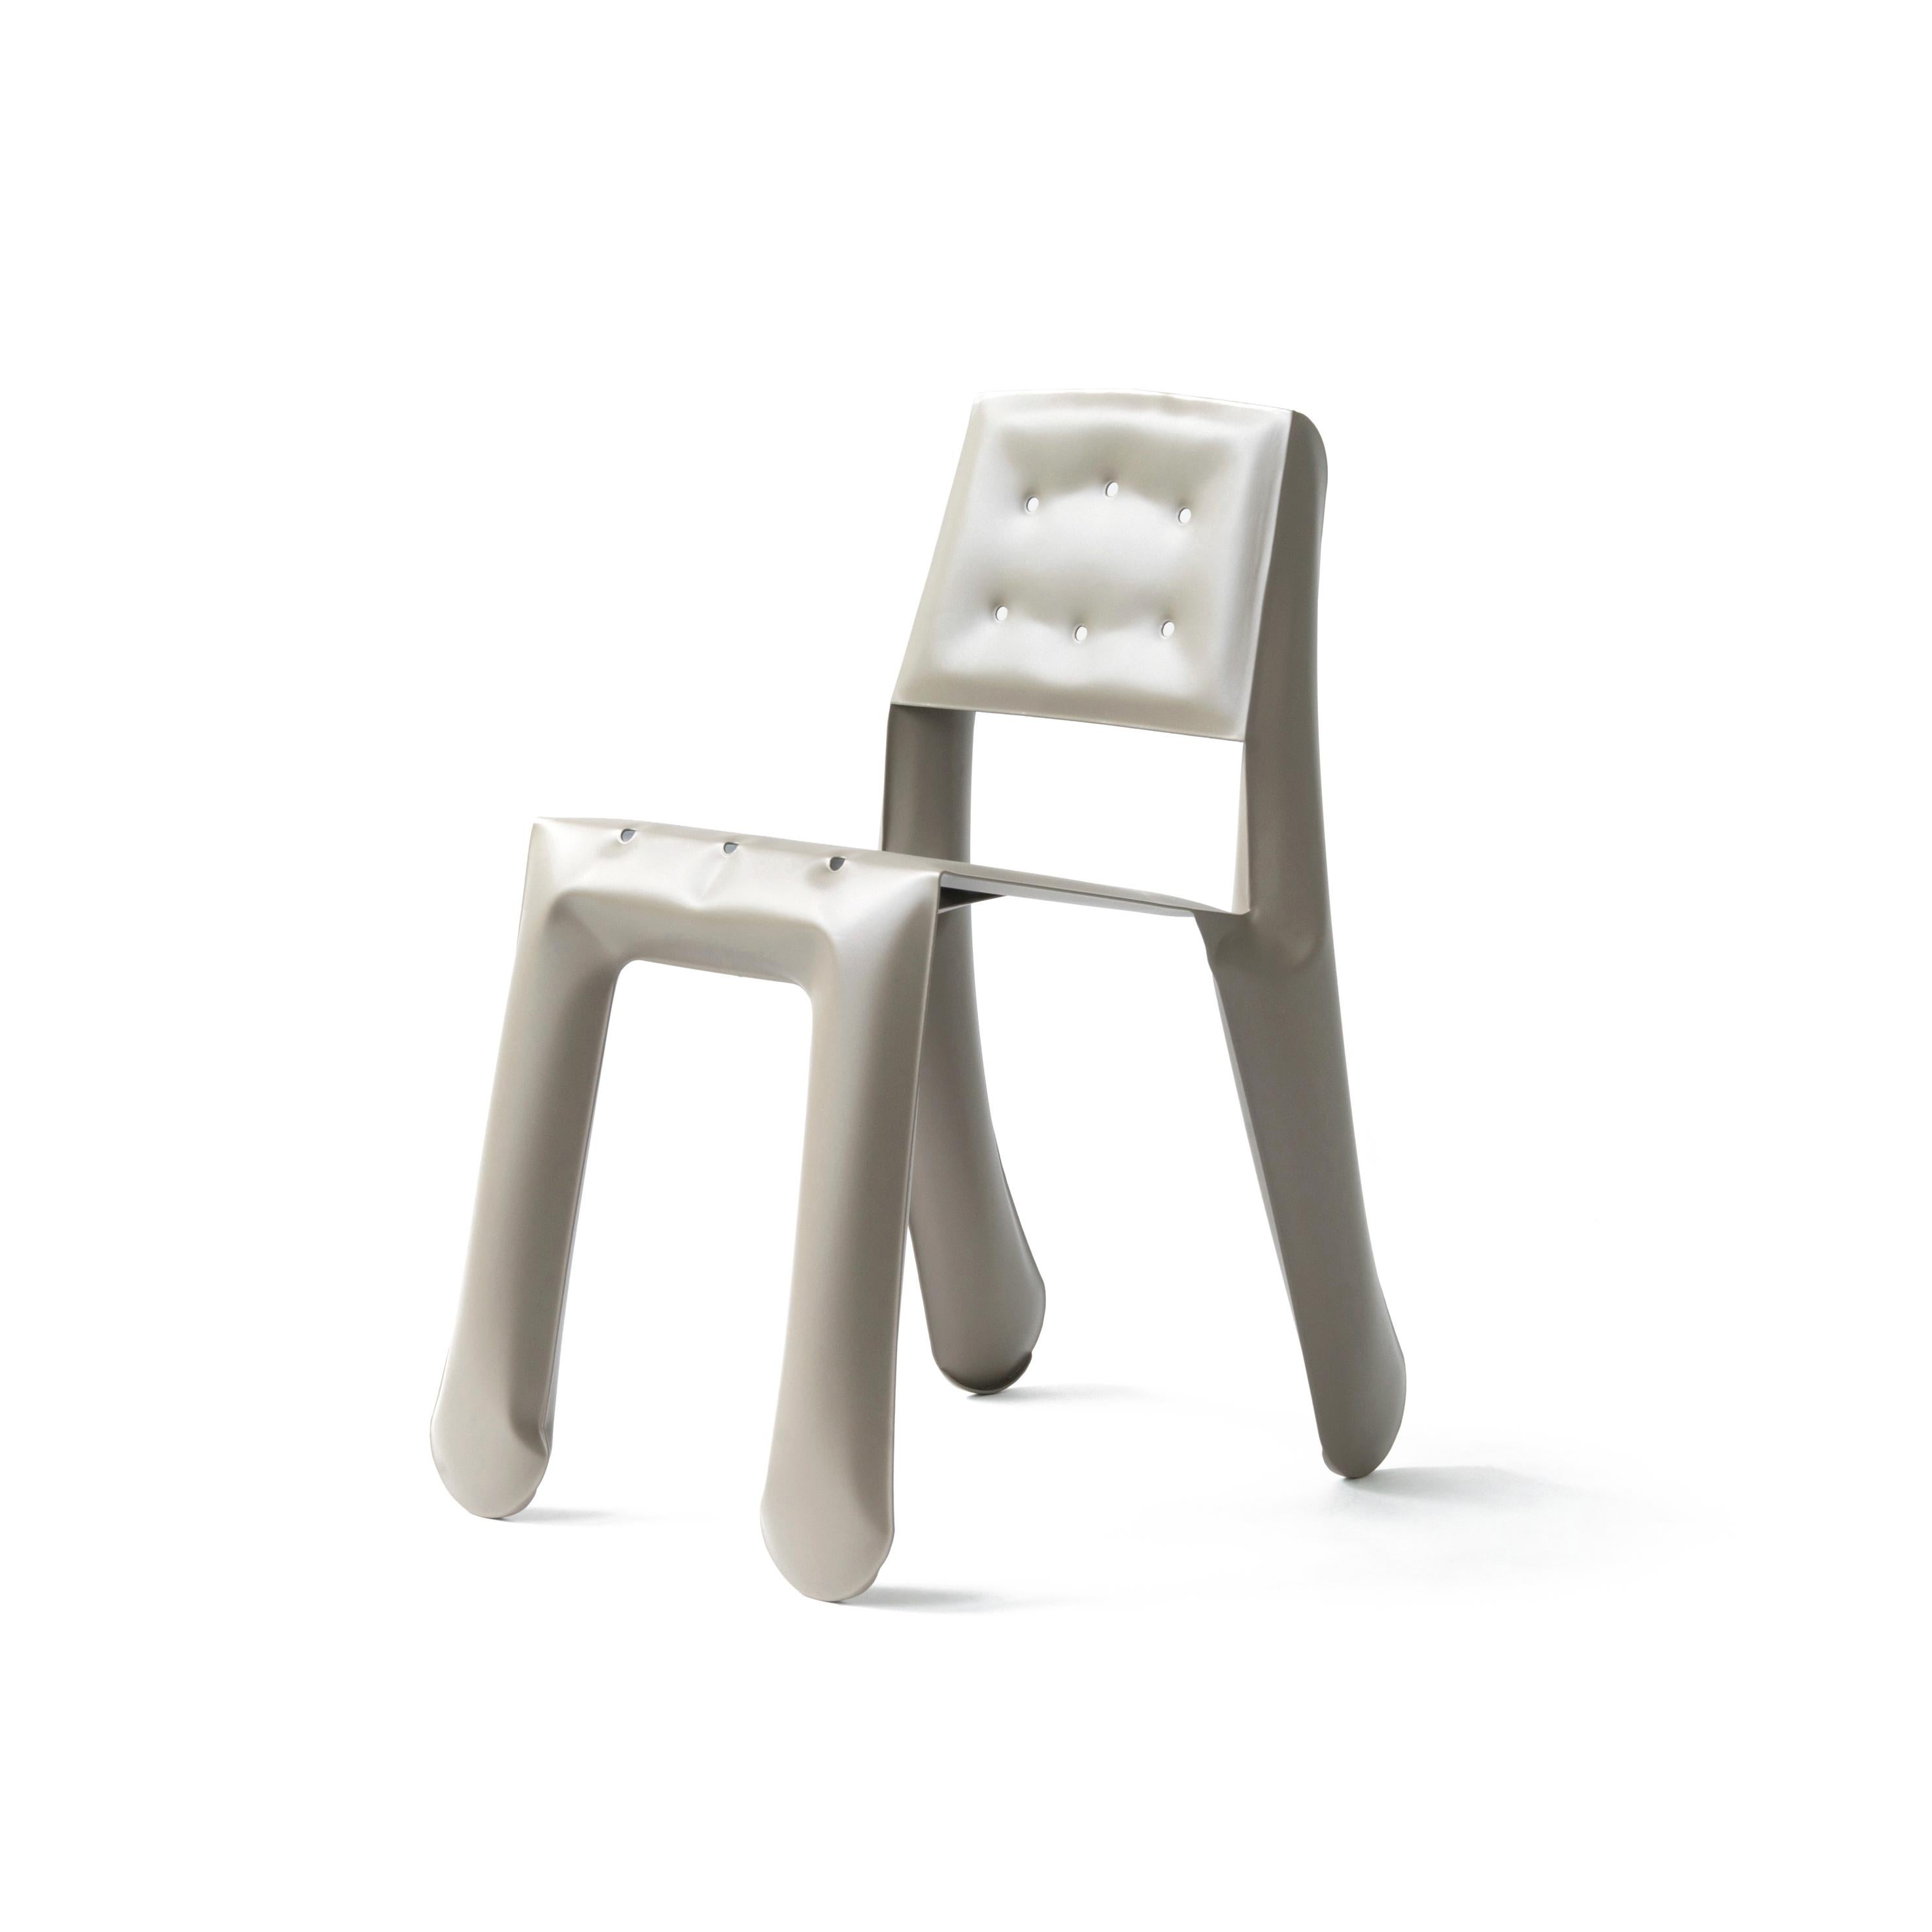 Beige Carbon Steel Chippensteel 0.5 Sculptural Chair by Zieta
Dimensions: D 58 x W 46 x H 80 cm 
Material: Carbon steel. 
Finish: Powder-Coated. Matt finish. 
Also available in colors: White Matt, Beige, Black, Blue-Gray, Graphite, Moss-Gray, and,